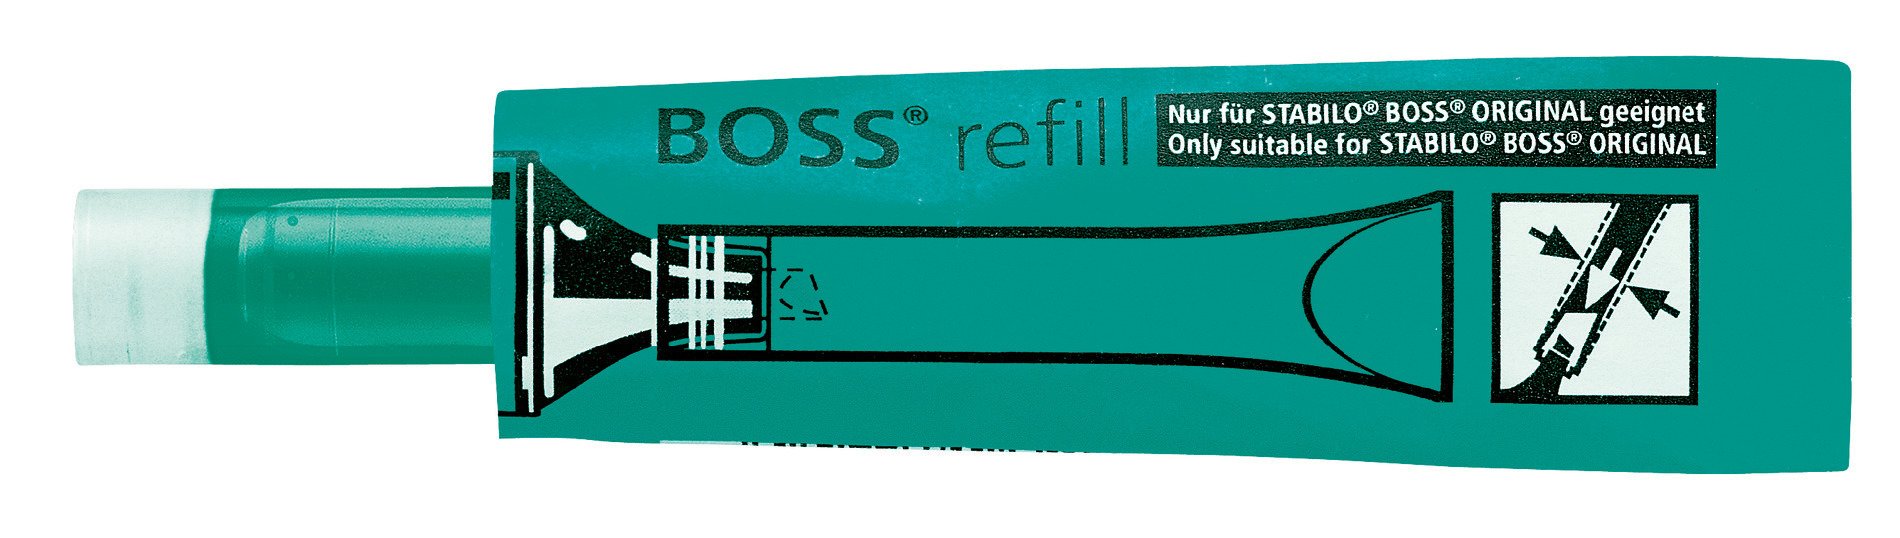 Recharges STABILO BOSS refill